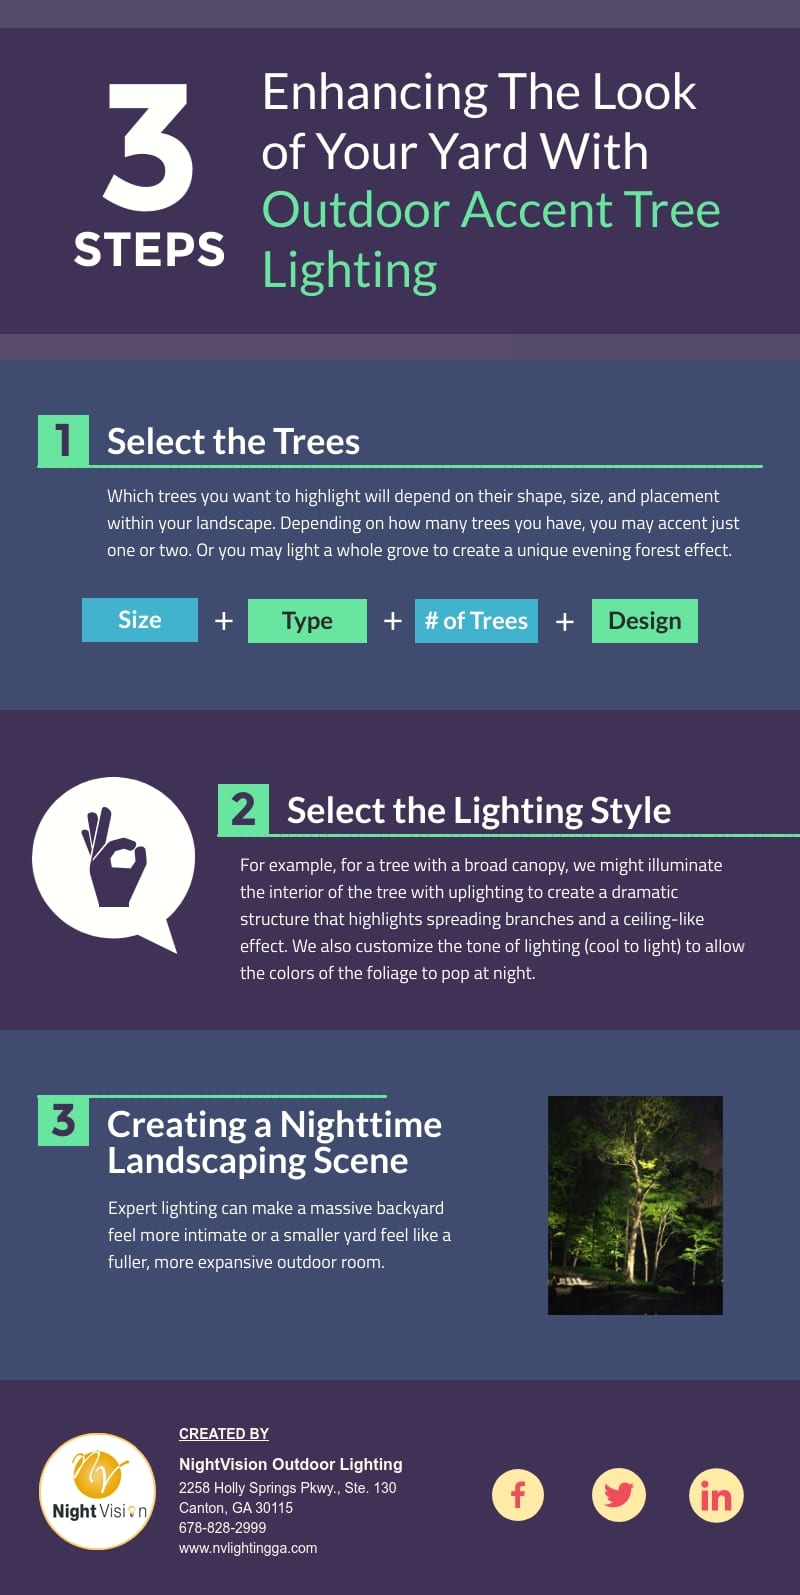 Enhancing The Look of Your Yard With Outdoor Accent Tree Lighting [infographic]